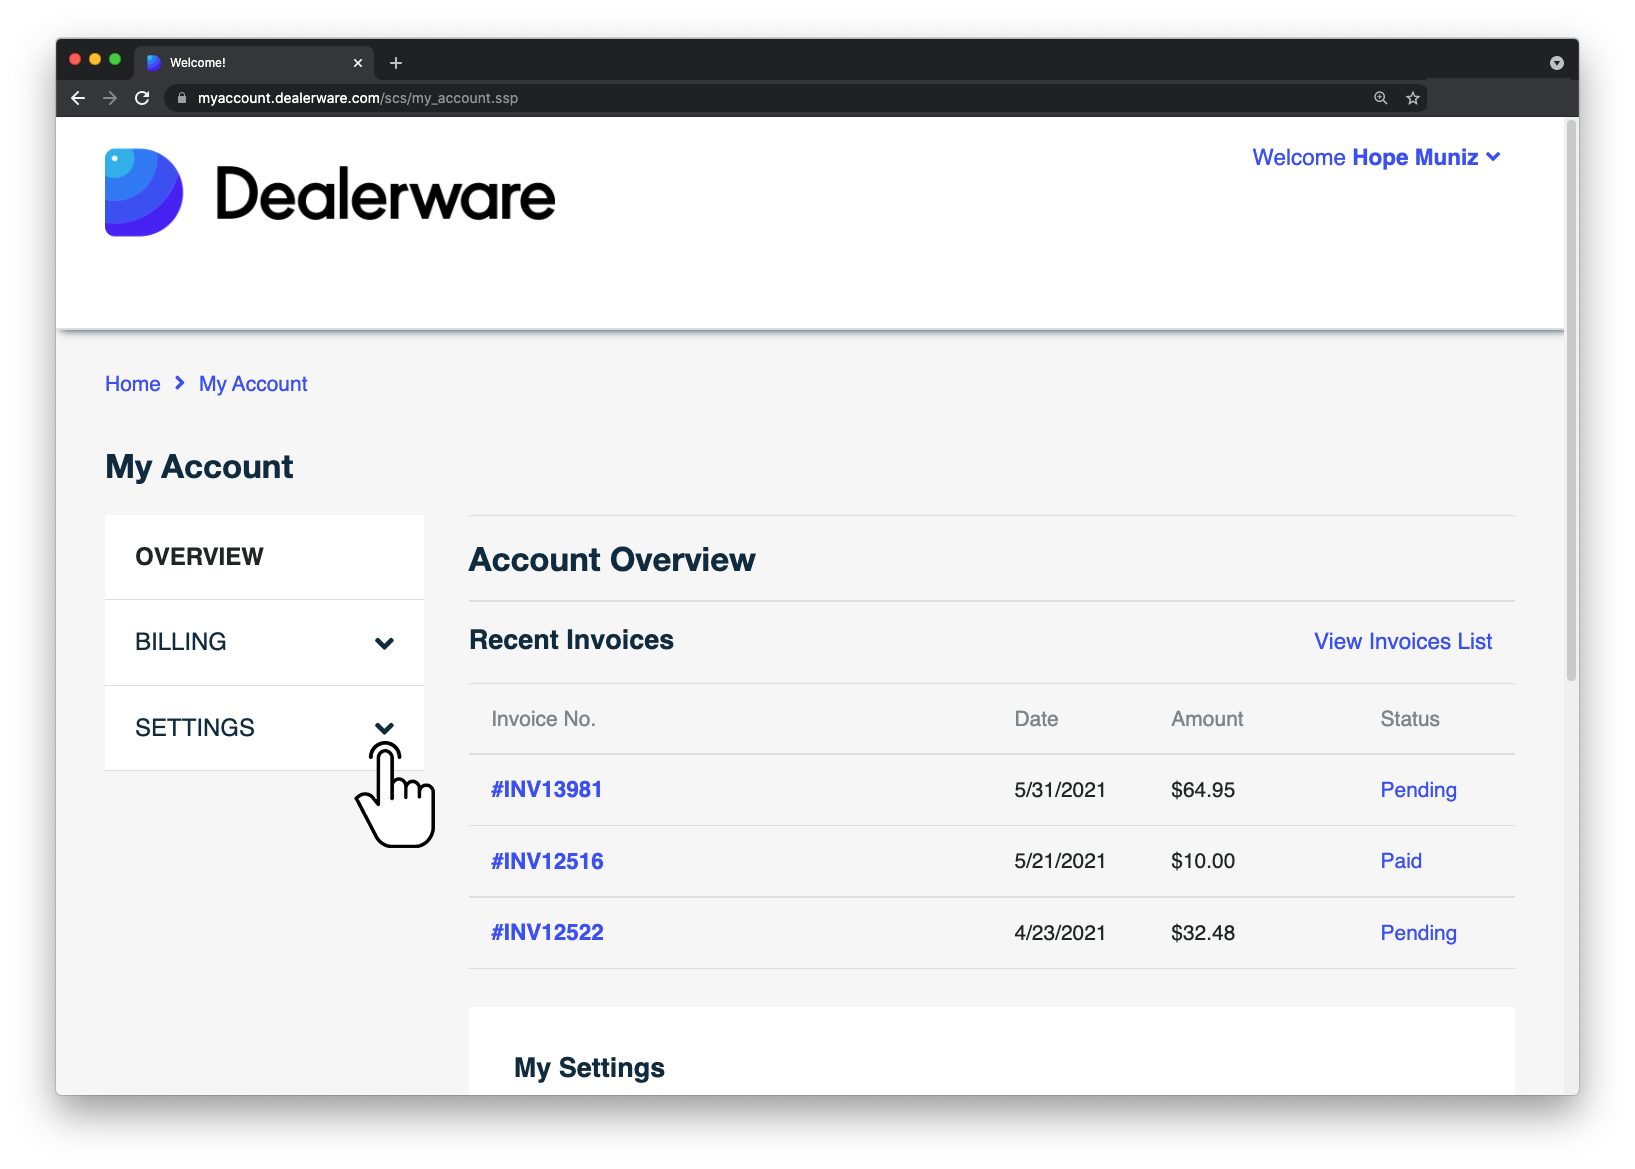 Image 5: Dealerware MyAccount screen, fingertap icon positioned over Settings option in Overview drop-down